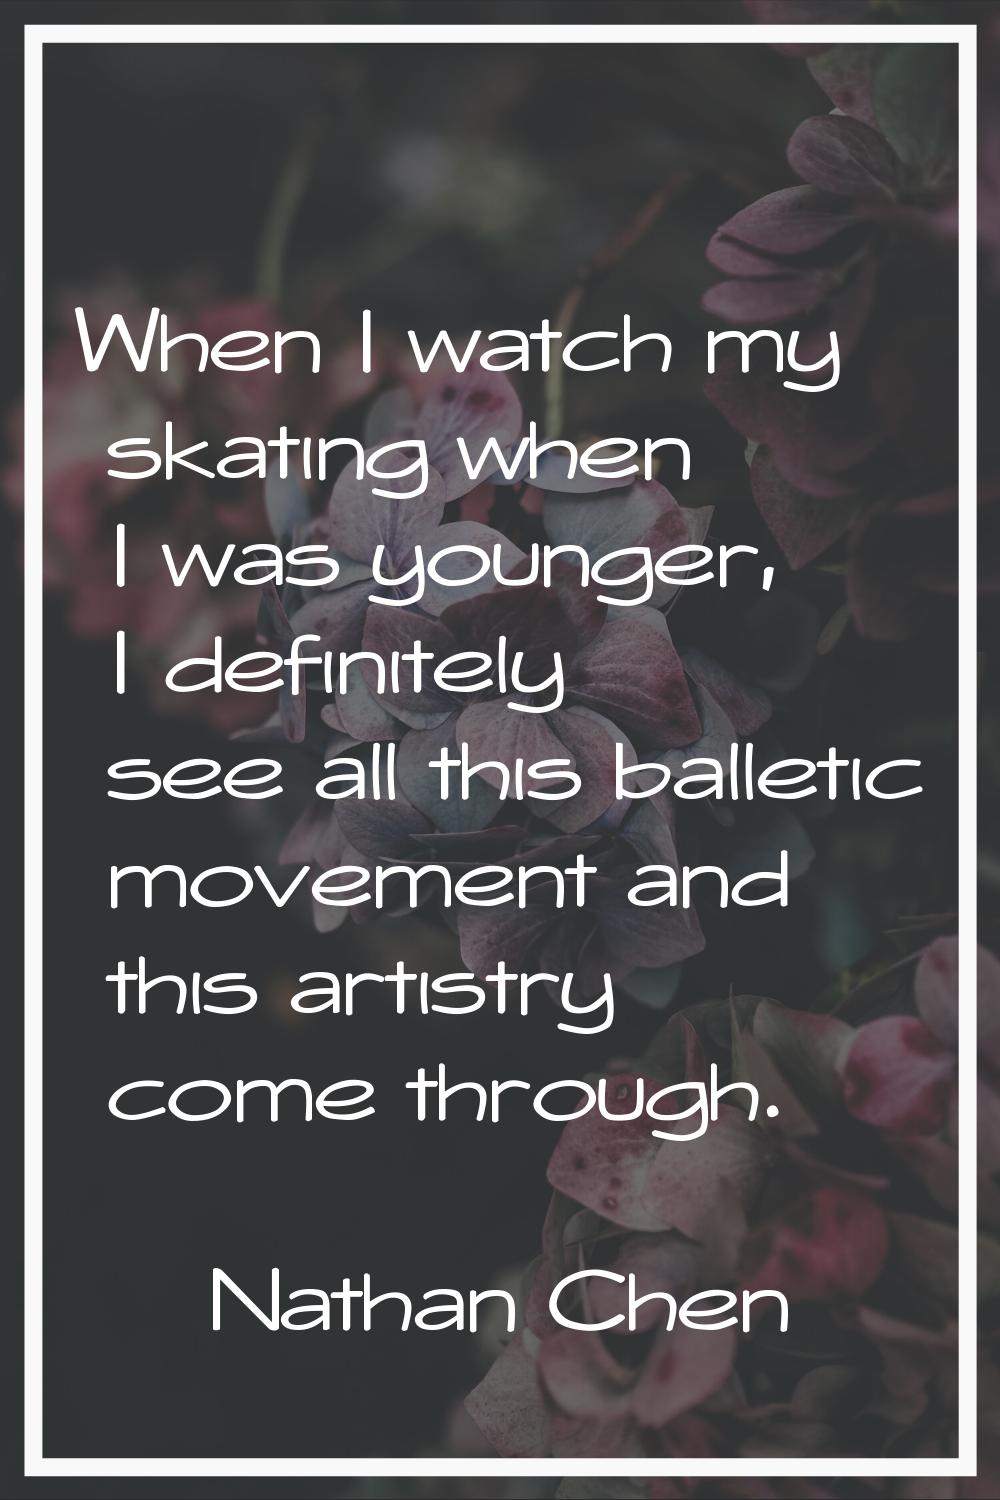 When I watch my skating when I was younger, I definitely see all this balletic movement and this ar